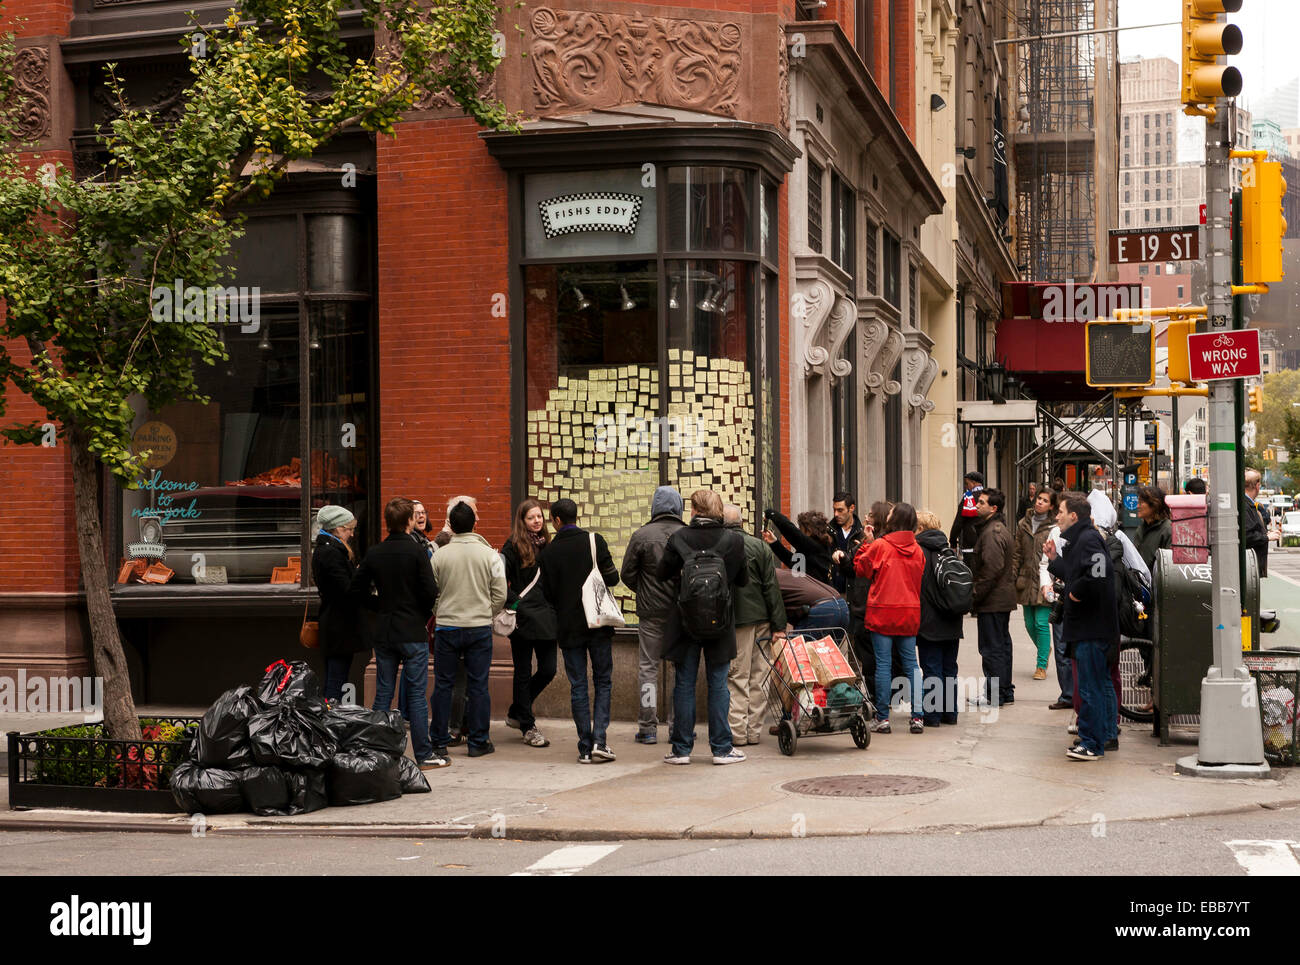 New York City, USA - Nov 2, 2012: After the Hurricane Sandy, people started to to post notes for Sandy on Fishs Eddy windows Stock Photo